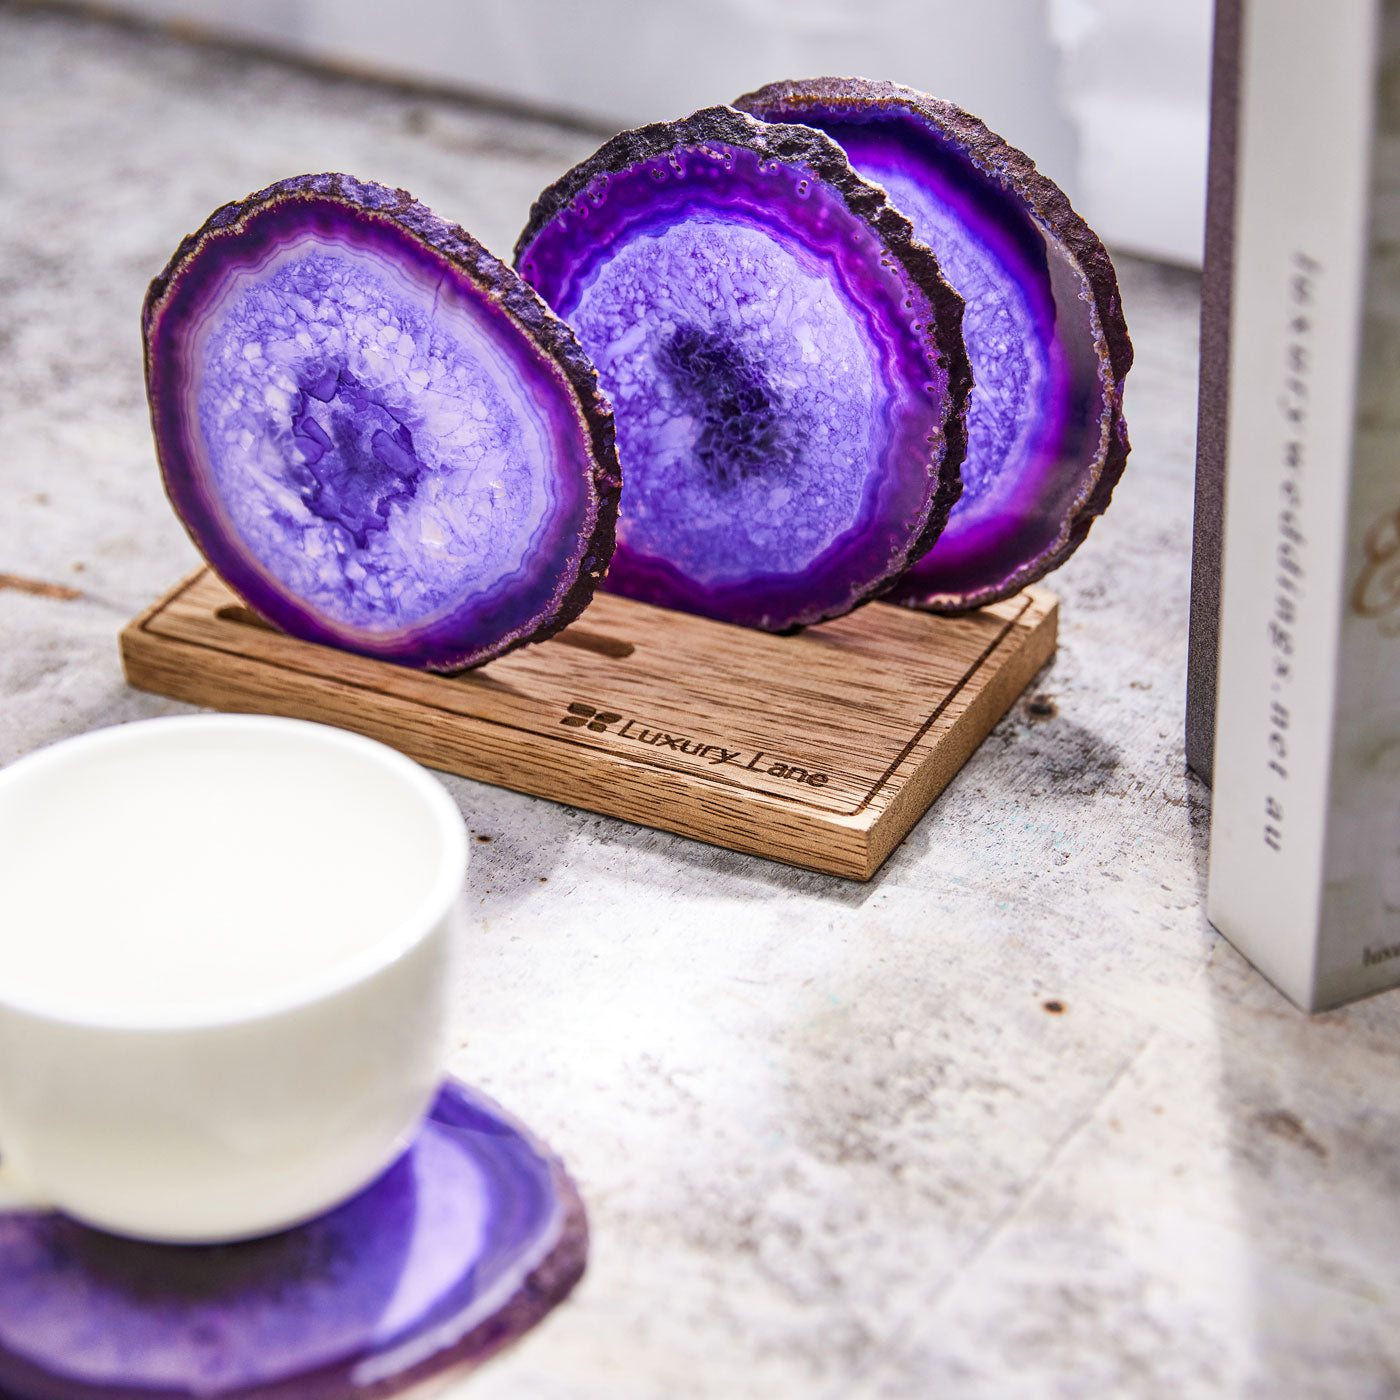 Set of 4 Natural Brazilian Agate Drink Coasters with Wood Holder - Amethyst